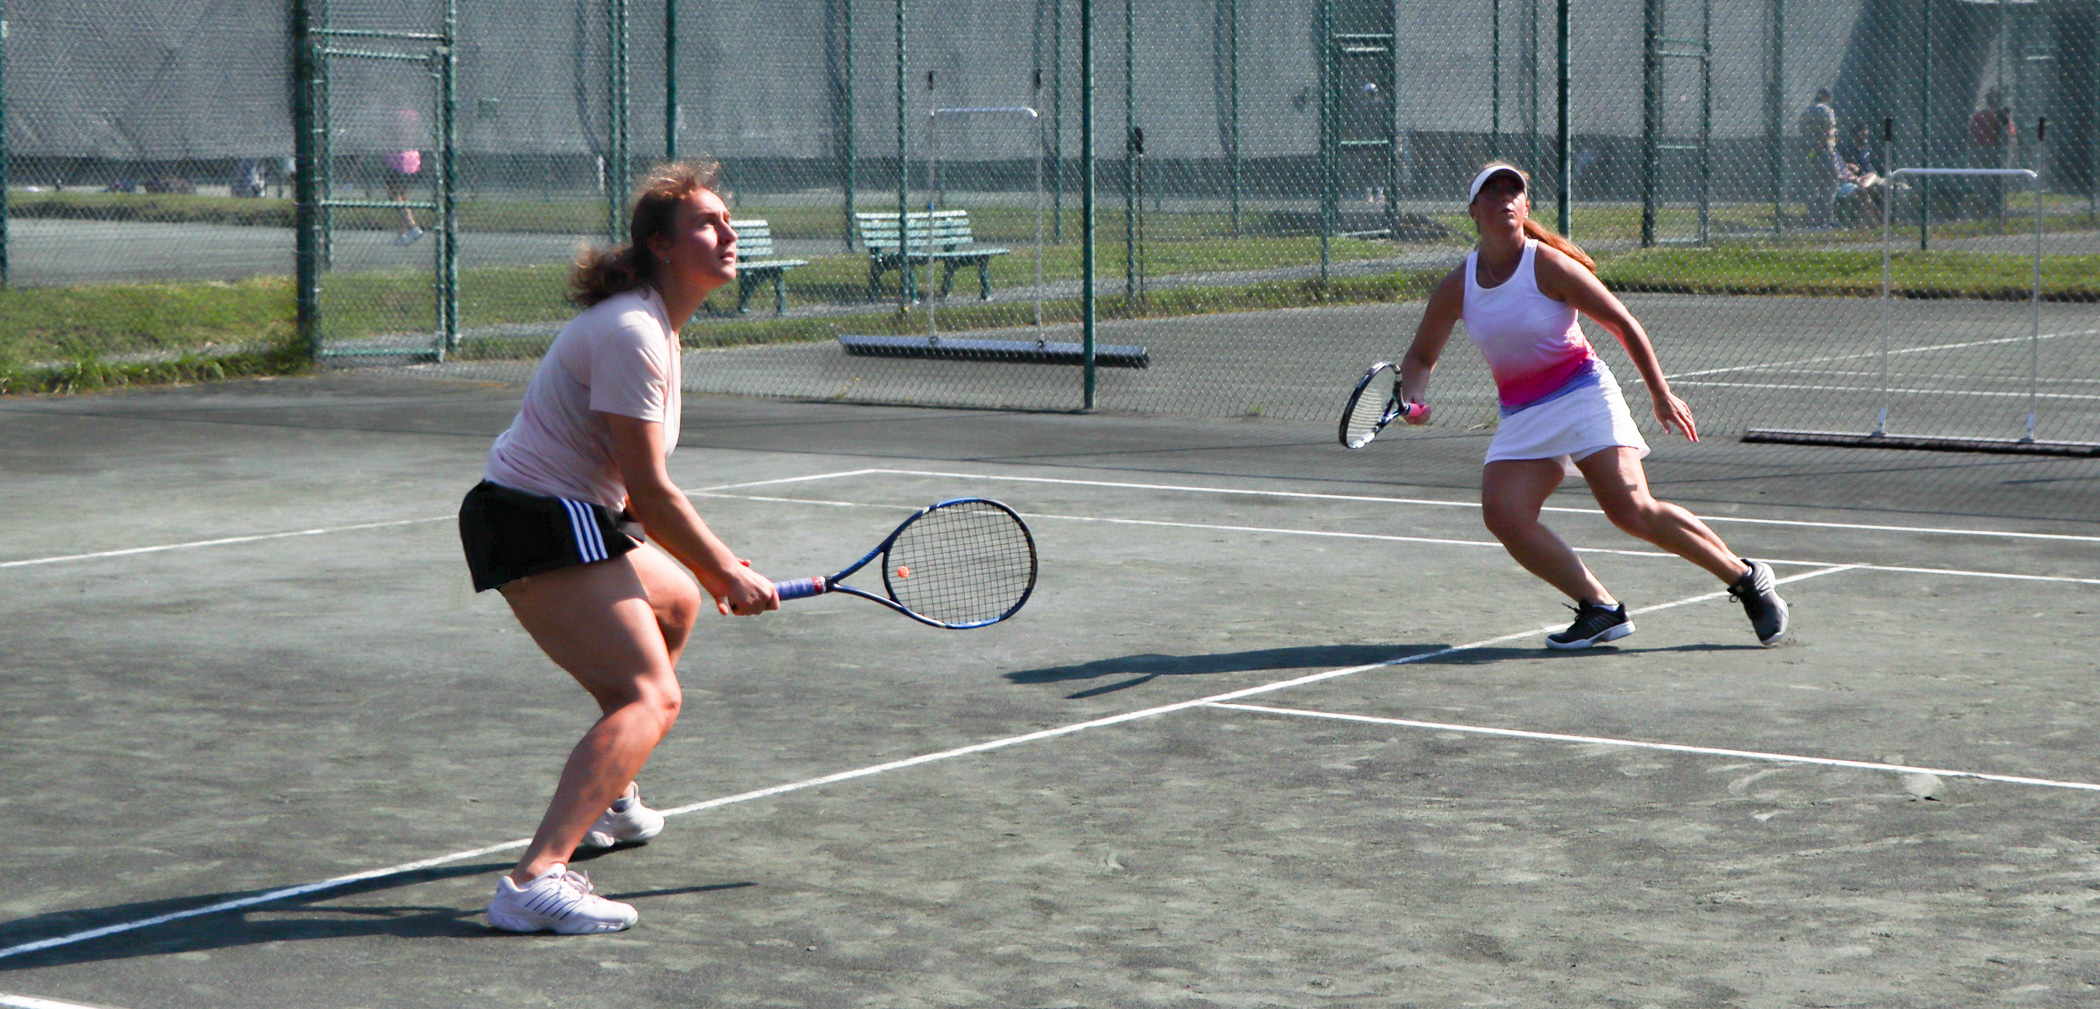 Two white women take an athletic stance on a tennis court.